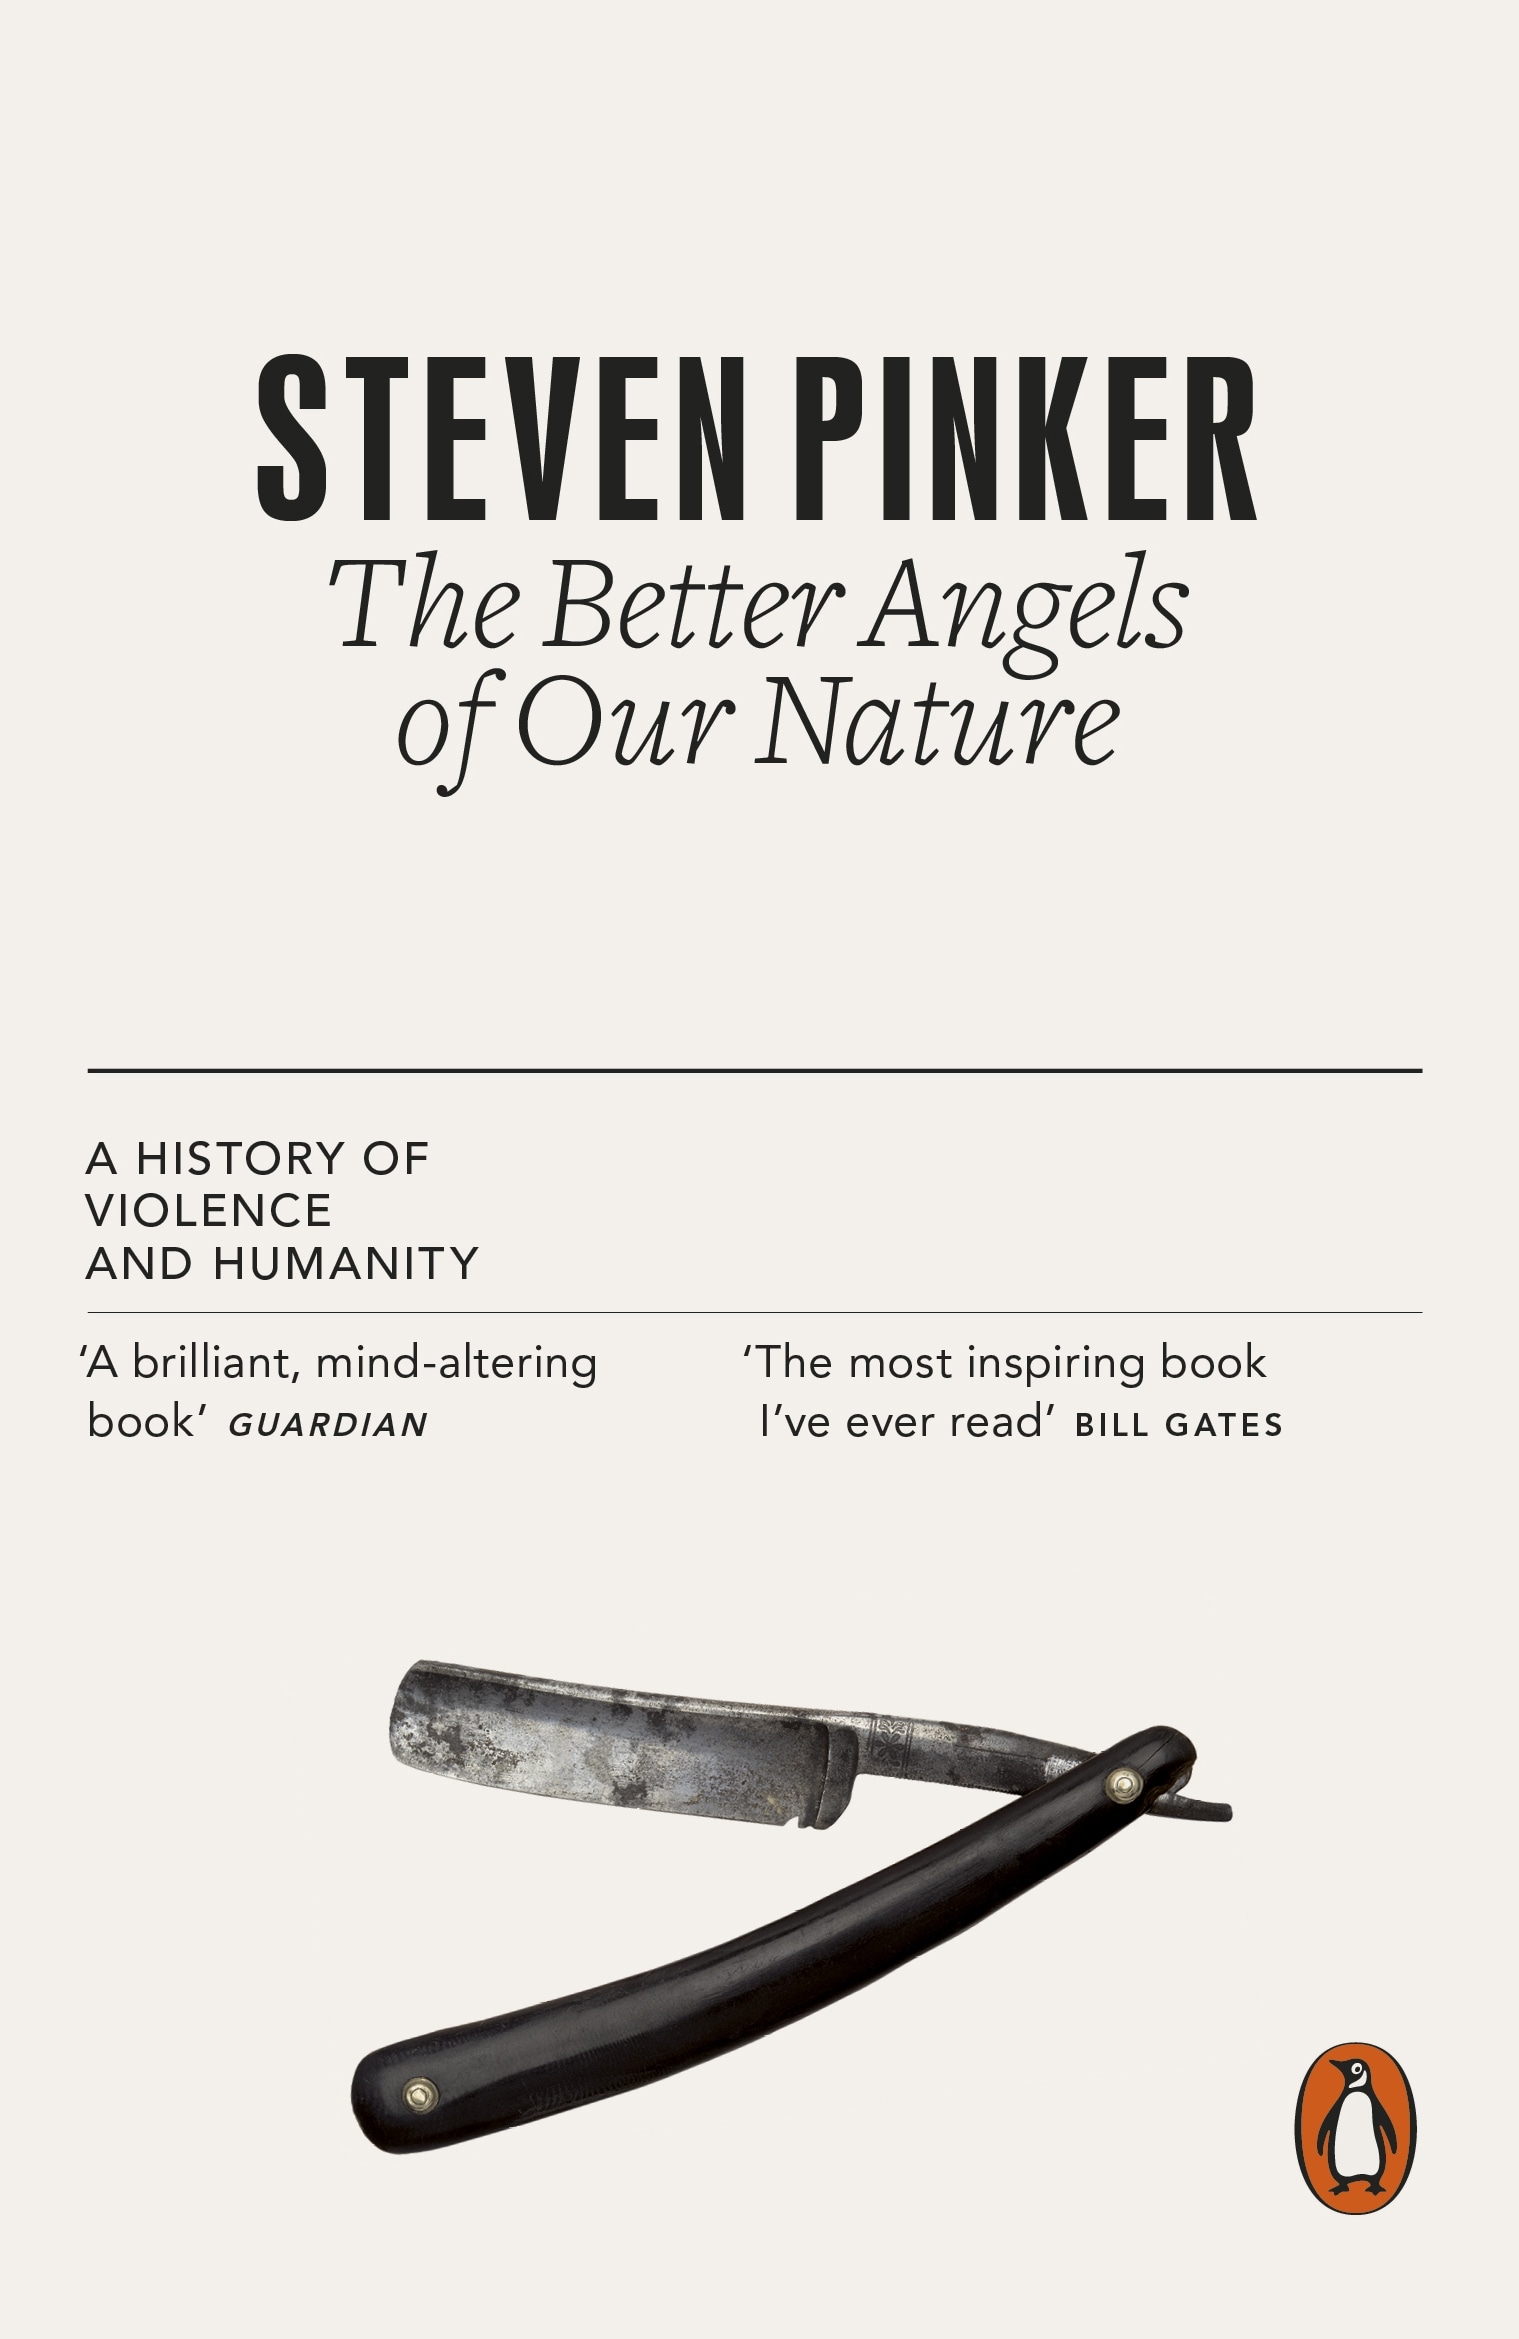 Book “The Better Angels of Our Nature” by Steven Pinker — October 4, 2012